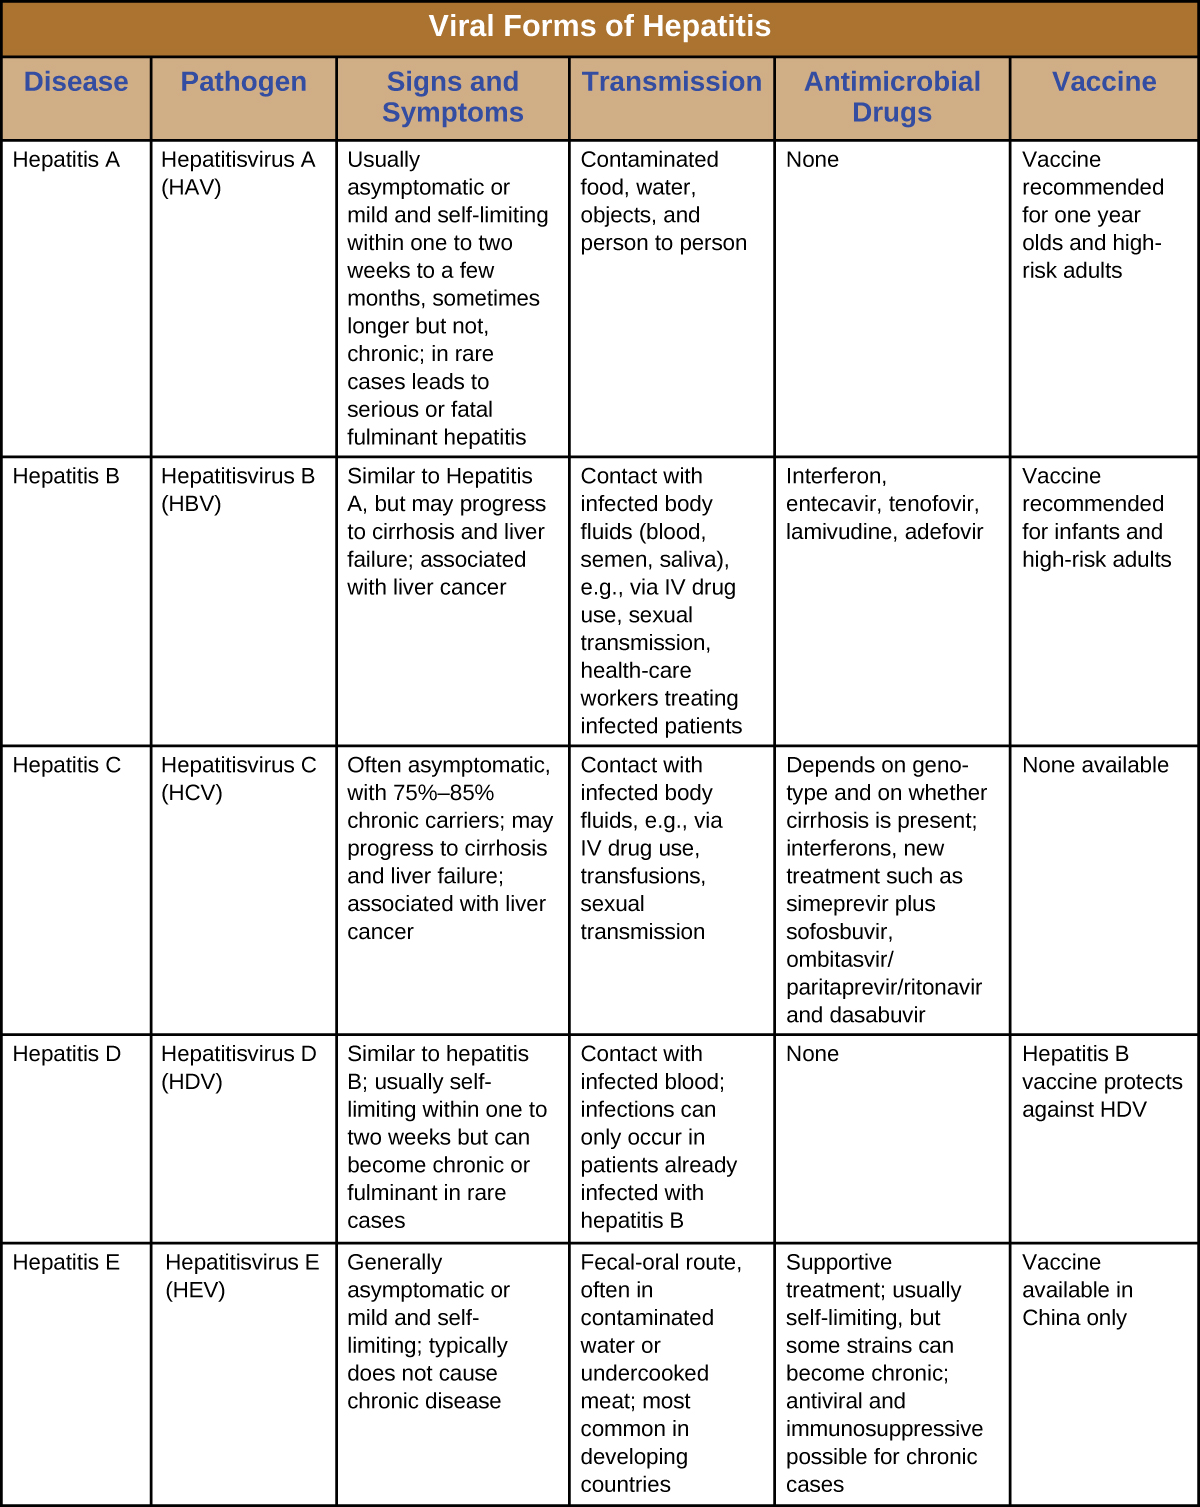 Table titled: Viral Forms of Hepatitis. Columns: Disease, Pathogen, Signs and Symptoms, Transmission; Antimicrobial Drugs; Vaccine. Hepatitis A; Hepatitisvirus A (HAV); Usually asymptomatic or mild and self-limiting within one to two weeks to a few months, sometimes longer but not, chronic; in rare cases leads to serious or fatal fulminant hepatitis; Contaminated food, water, objects, and person to person; None; Vaccine recommended for one year olds and high-risk adults. Hepatitis B Hepatitisvirus B (HBV); Similar to Hepatitis A, but may progress to cirrhosis and liver failure; associated with liver cancer; Contact with infected body fluids (blood, semen, saliva), e.g., via IV drug use, sexual transmission, health-care workers treating infected patients ; Interferon, entecavir, tenofovir, lamivudine, adefovir ; Vaccine recommended for infants and high-risk adults. Hepatitis C Hepatitisvirus C (HCV); Often asymptomatic, with 75%–85% chronic carriers; may progress to cirrhosis and liver failure; associated with liver cancer; Contact with infected body fluids, e.g., via IV drug use, transfusions, sexual transmission; Depends on genotype and on whether cirrhosis is present; interferons, new treatment such as simeprevir plus sofosbuvir, ombitasvir/paritaprevir/ritonavir and dasabuvir; None available. Hepatitis D; Hepatitisvirus D (HDV); Similar to hepatitis B; usually self-limiting within one to two weeks but can become chronic or fulminant in rare cases ; Contact with infected blood; infections can only occur in patients already infected with hepatitis B; None. Hepatitis B vaccine protects against HDV; Hepatitis E; Hepatitisvirus E (HEV); Generally asymptomatic or mild and self-limiting; typically does not cause chronic disease; Fecal-oral route, often in contaminated water or undercooked meat; most common in developing countries; Supportive treatment; usually self-limiting, but some strains can become chronic; antiviral and immunosuppressive possible for chronic cases; Vaccine available in China only.